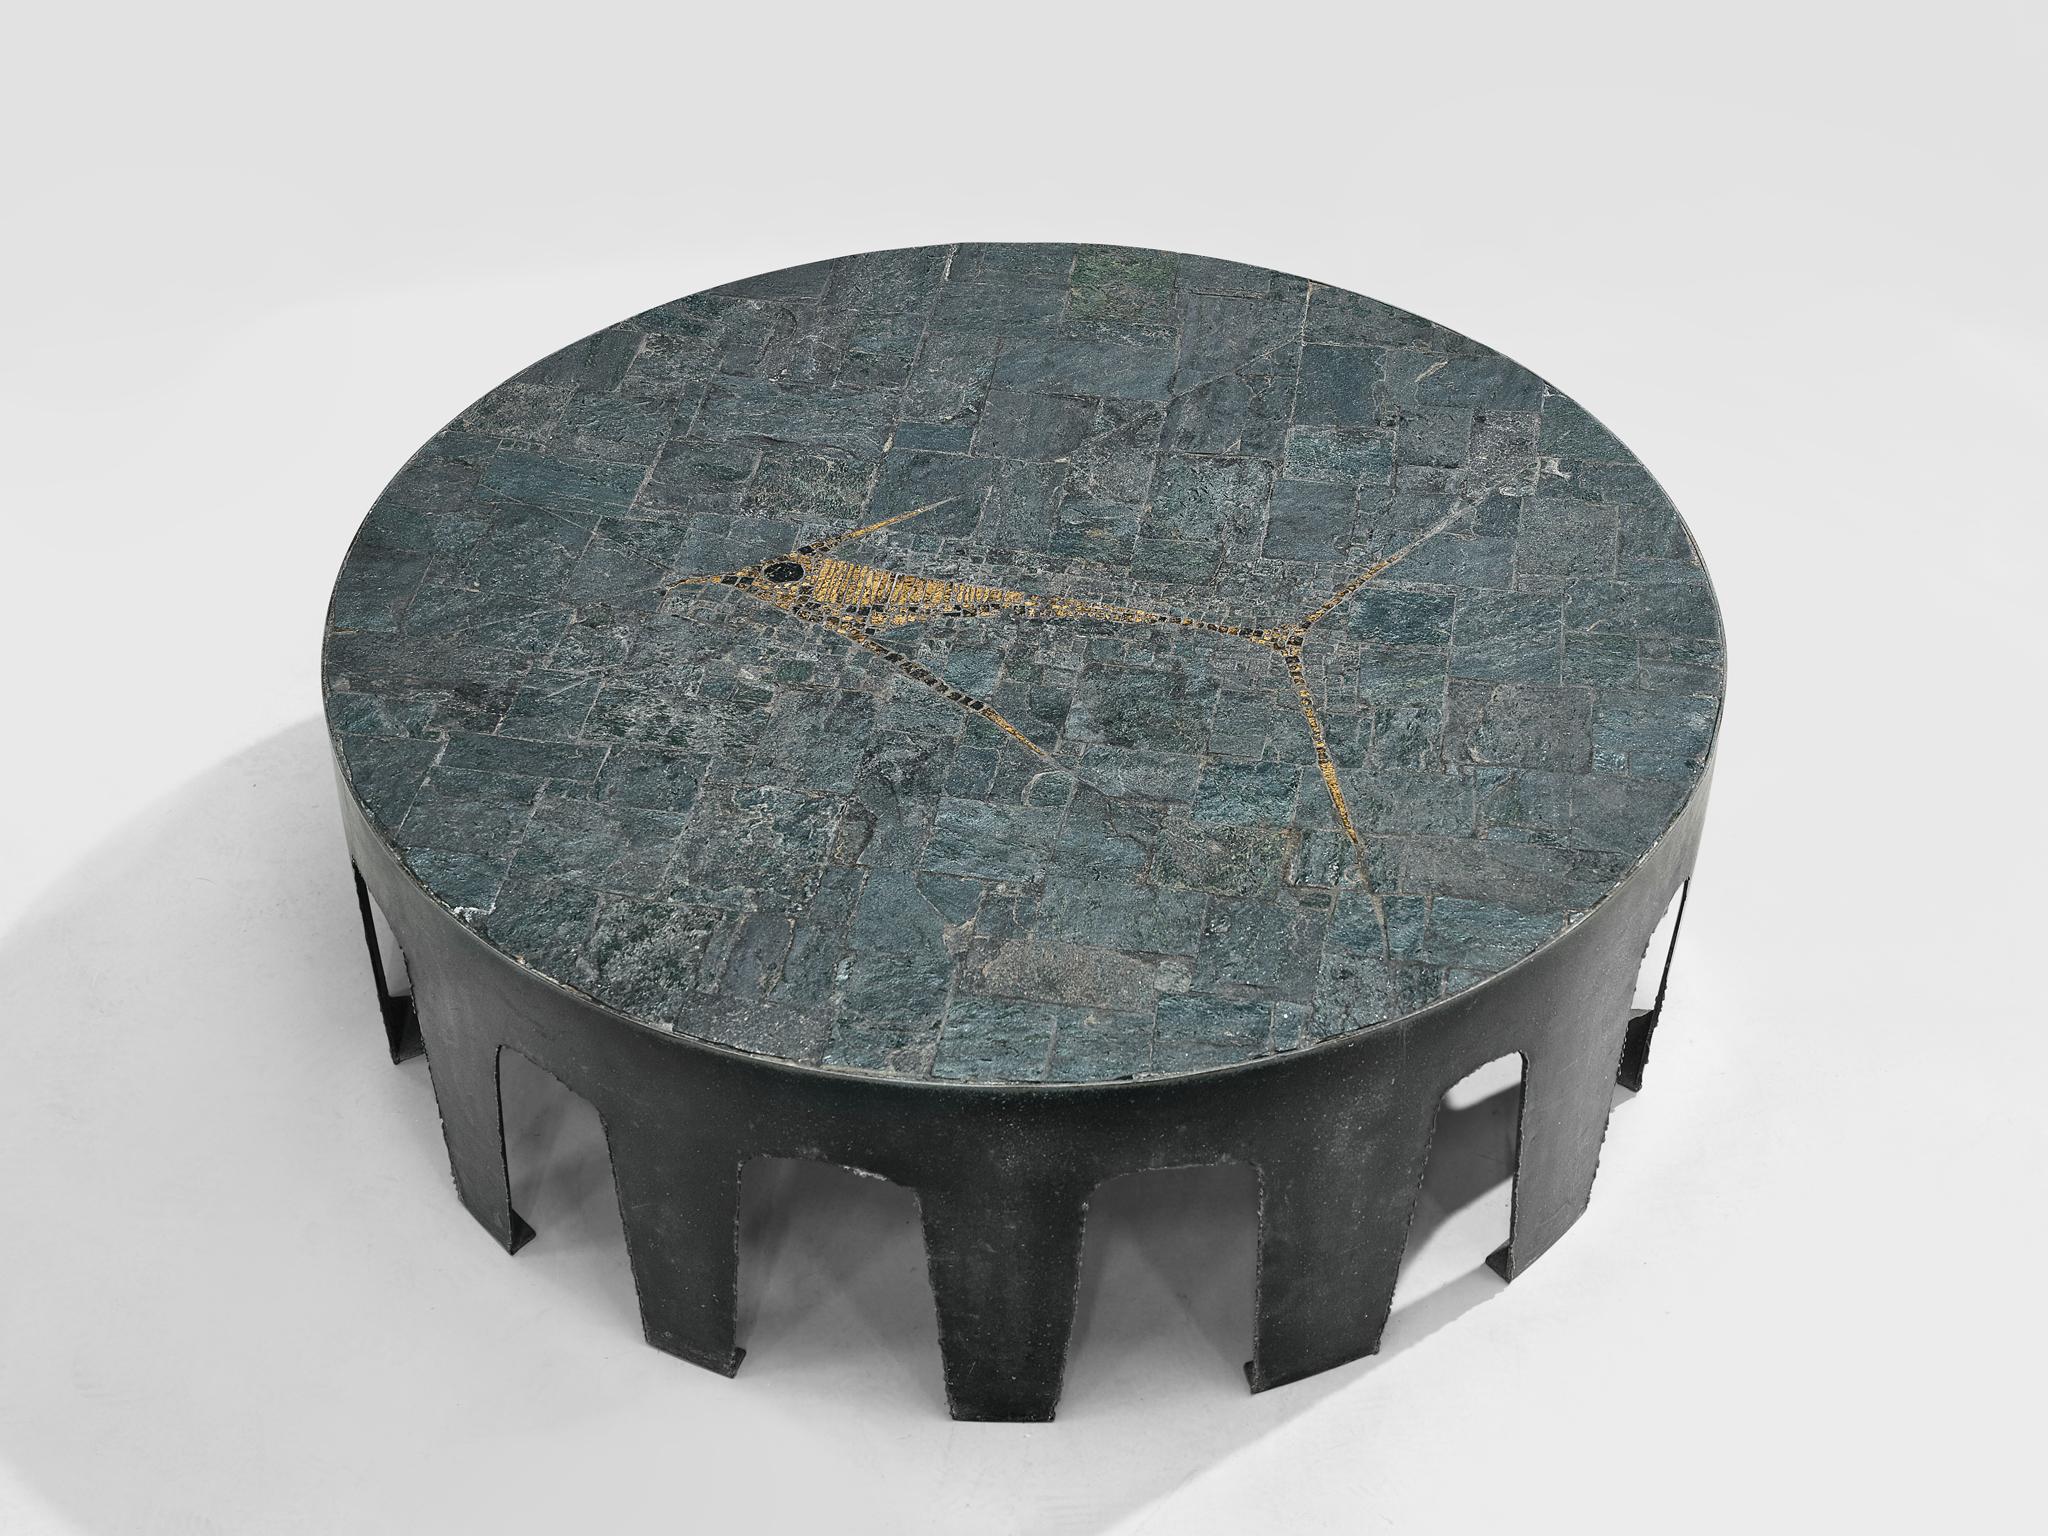 Pia Manu, coffee table, slate, pyrite, iron, Belgium, 1960s

This unique, handmade coffee table with cut and wrought iron frame is designed in the workshop of Pia Manu. First off, the tabletop is what catches your eye. With its subtle tones of black